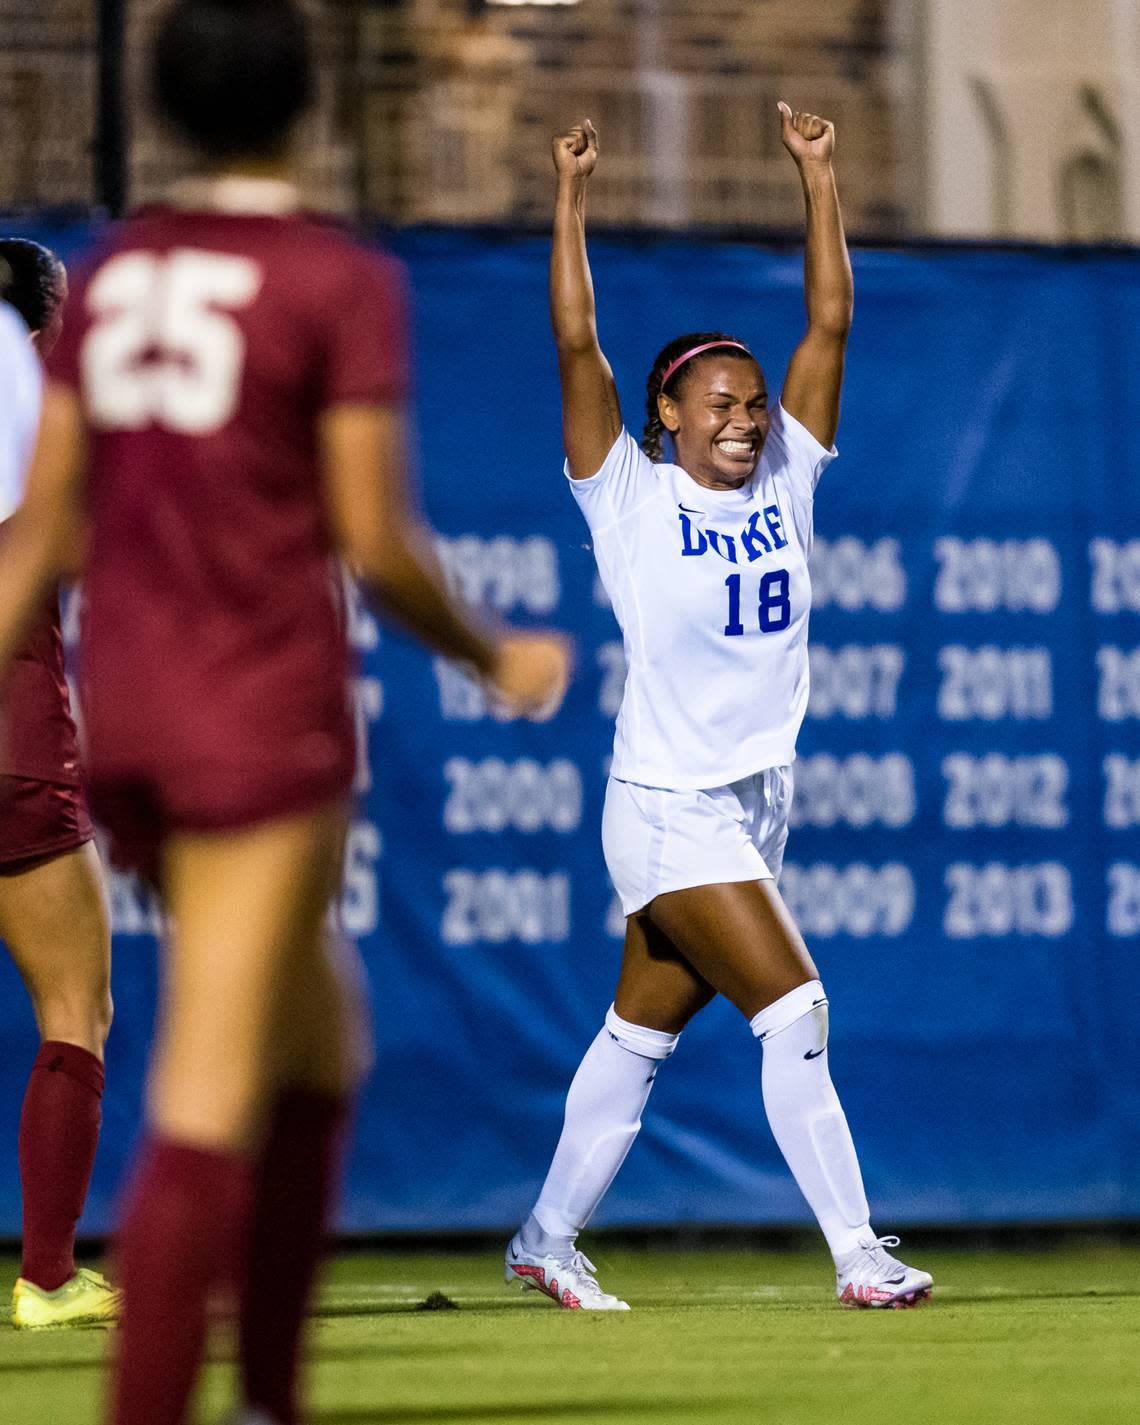 Duke forward Michelle Cooper led the ACC with 19 goals and was named ACC offensive player of the year as a sophomore. She’s already turned pro to pursue her career at the next level.